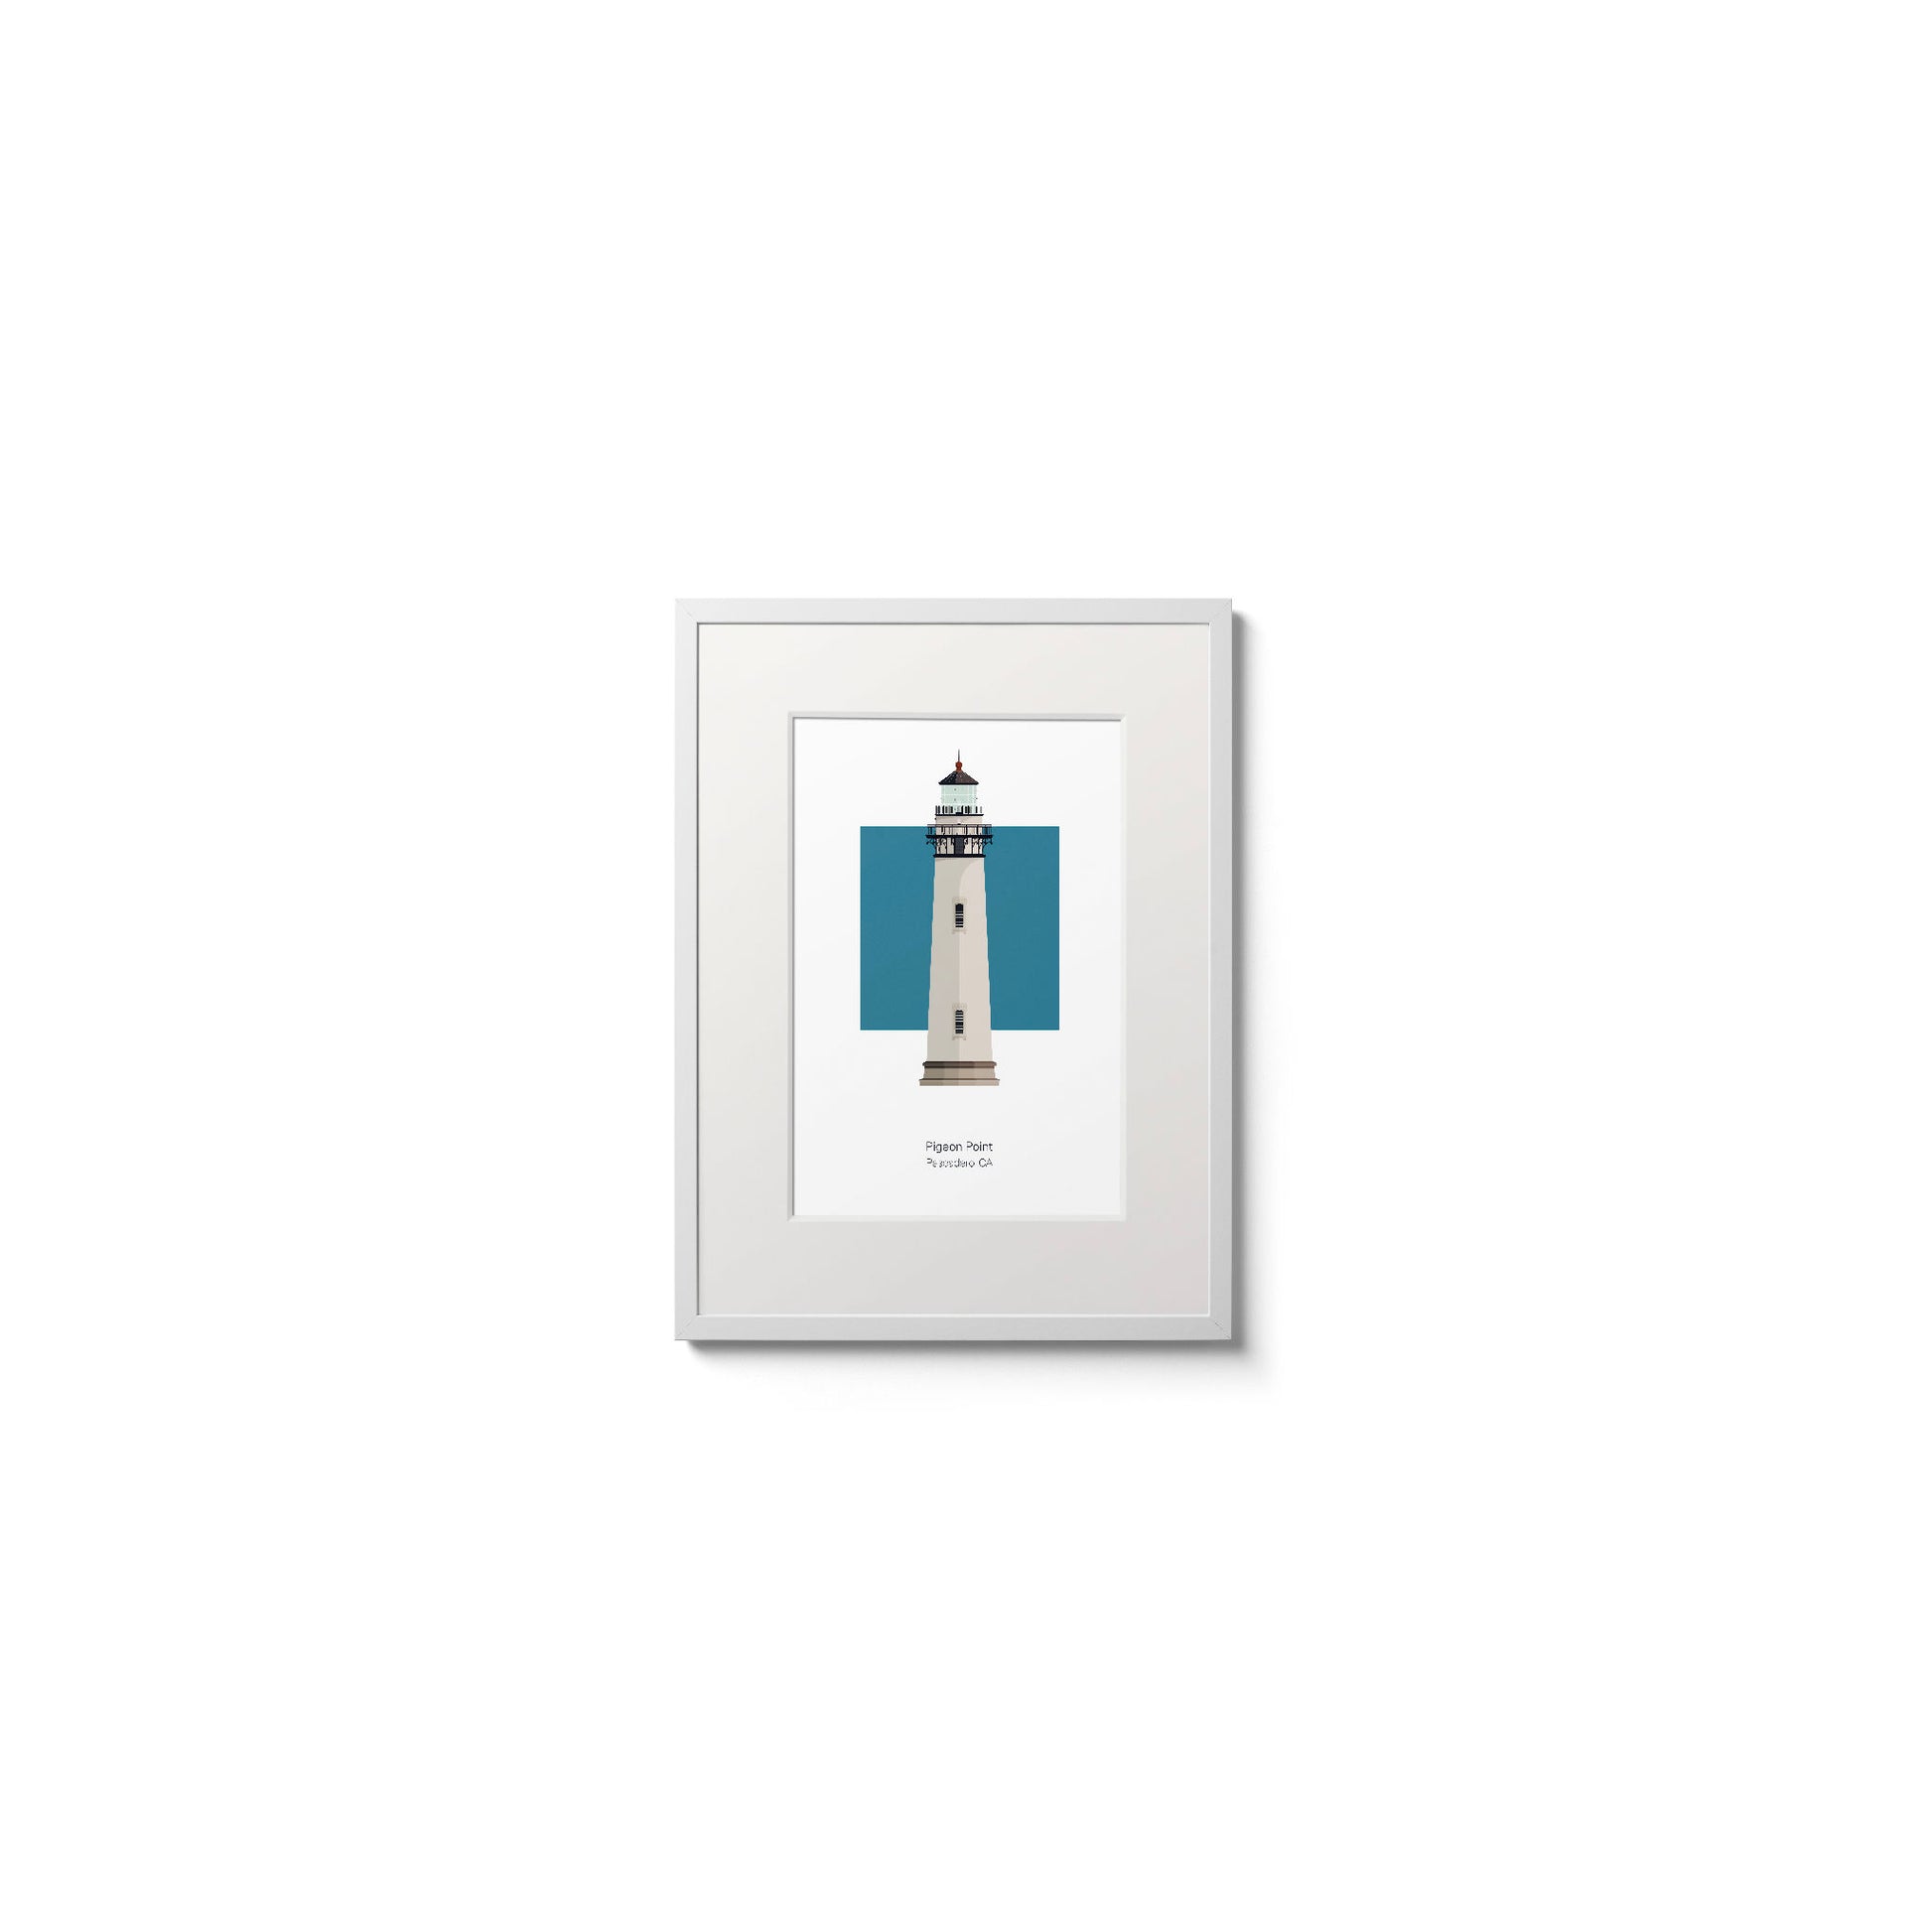 Illustration of the Pigeon Point lighthouse, California, USA. On a white background with aqua blue square as a backdrop., in a white frame  and measuring 6"x8" (15x20cm).